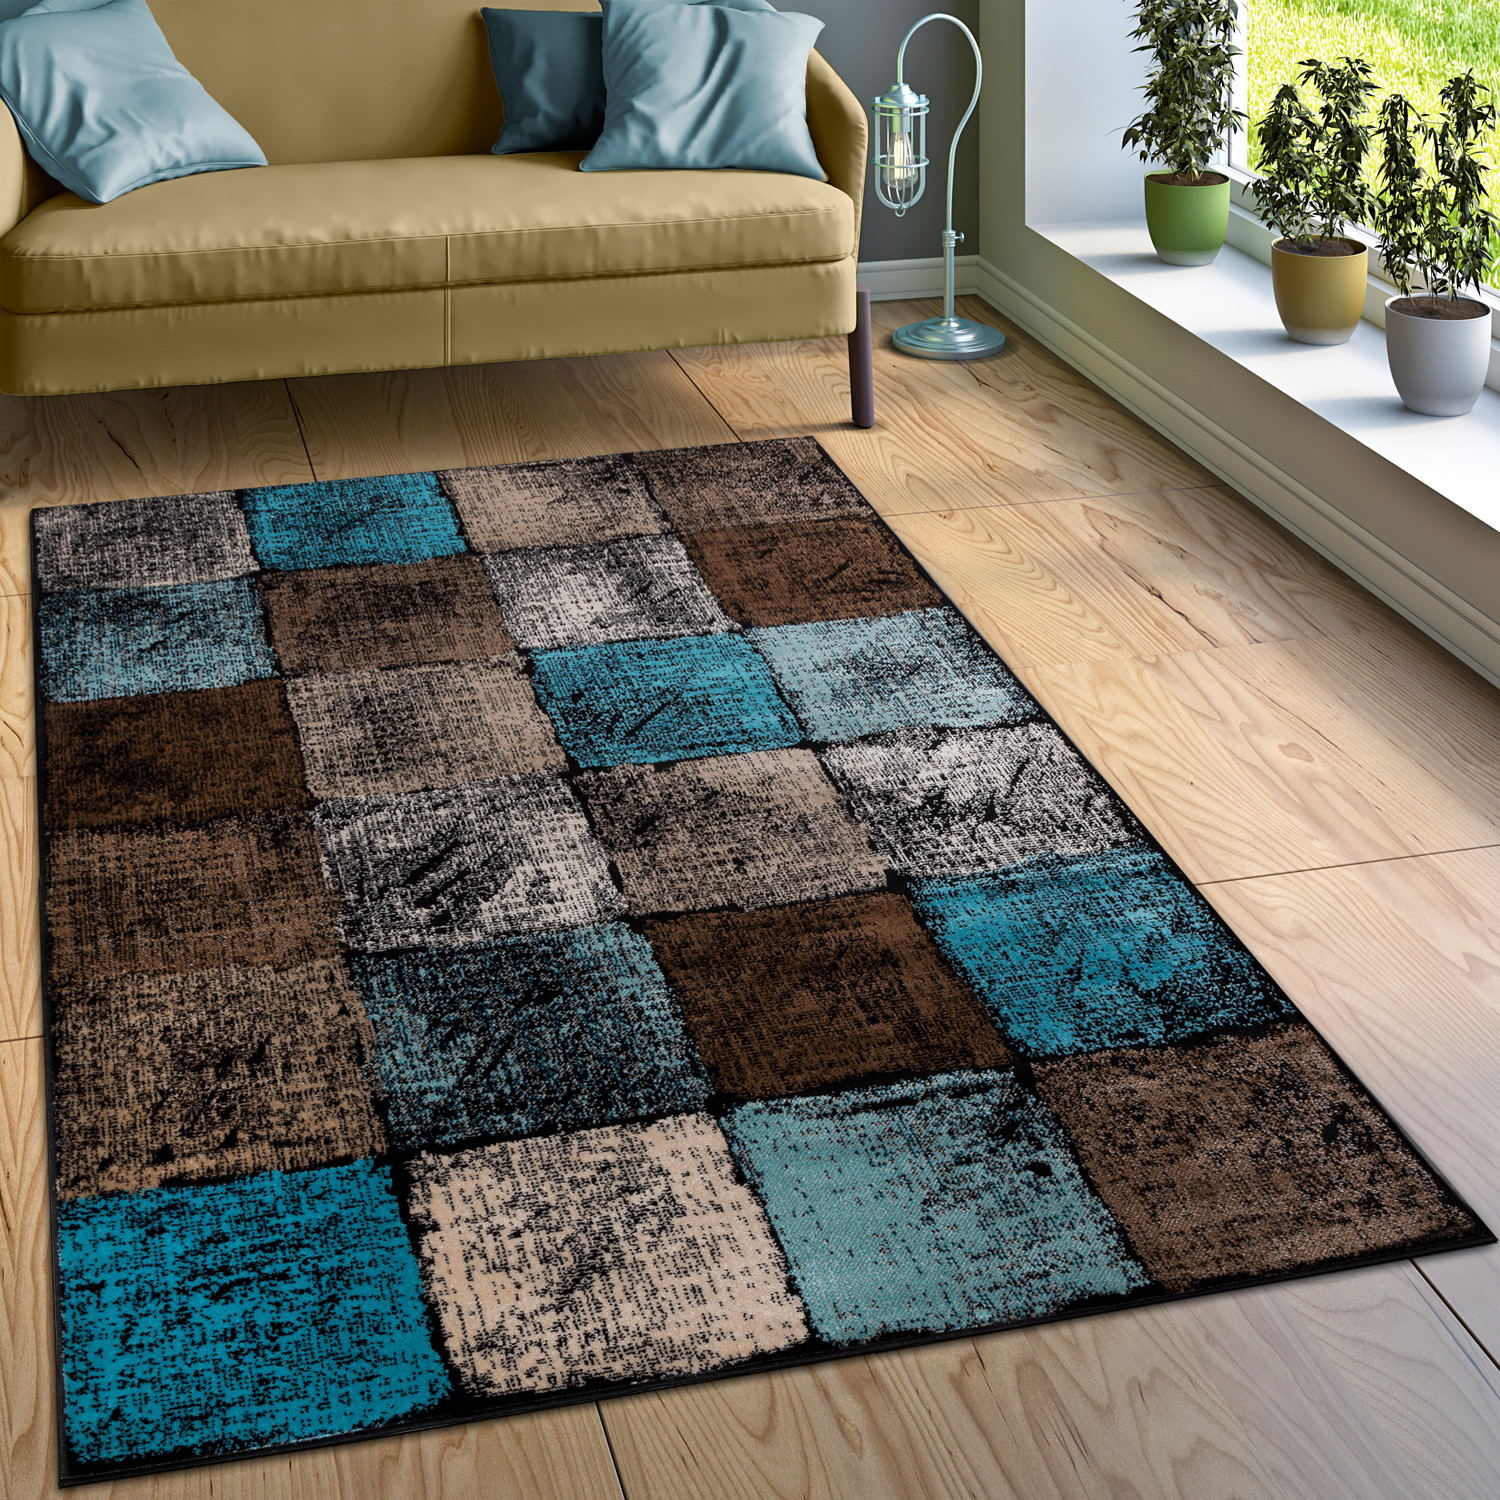 Turquoise Rug Living Room
 Designer Rug Checked Turquoise Brown Cream